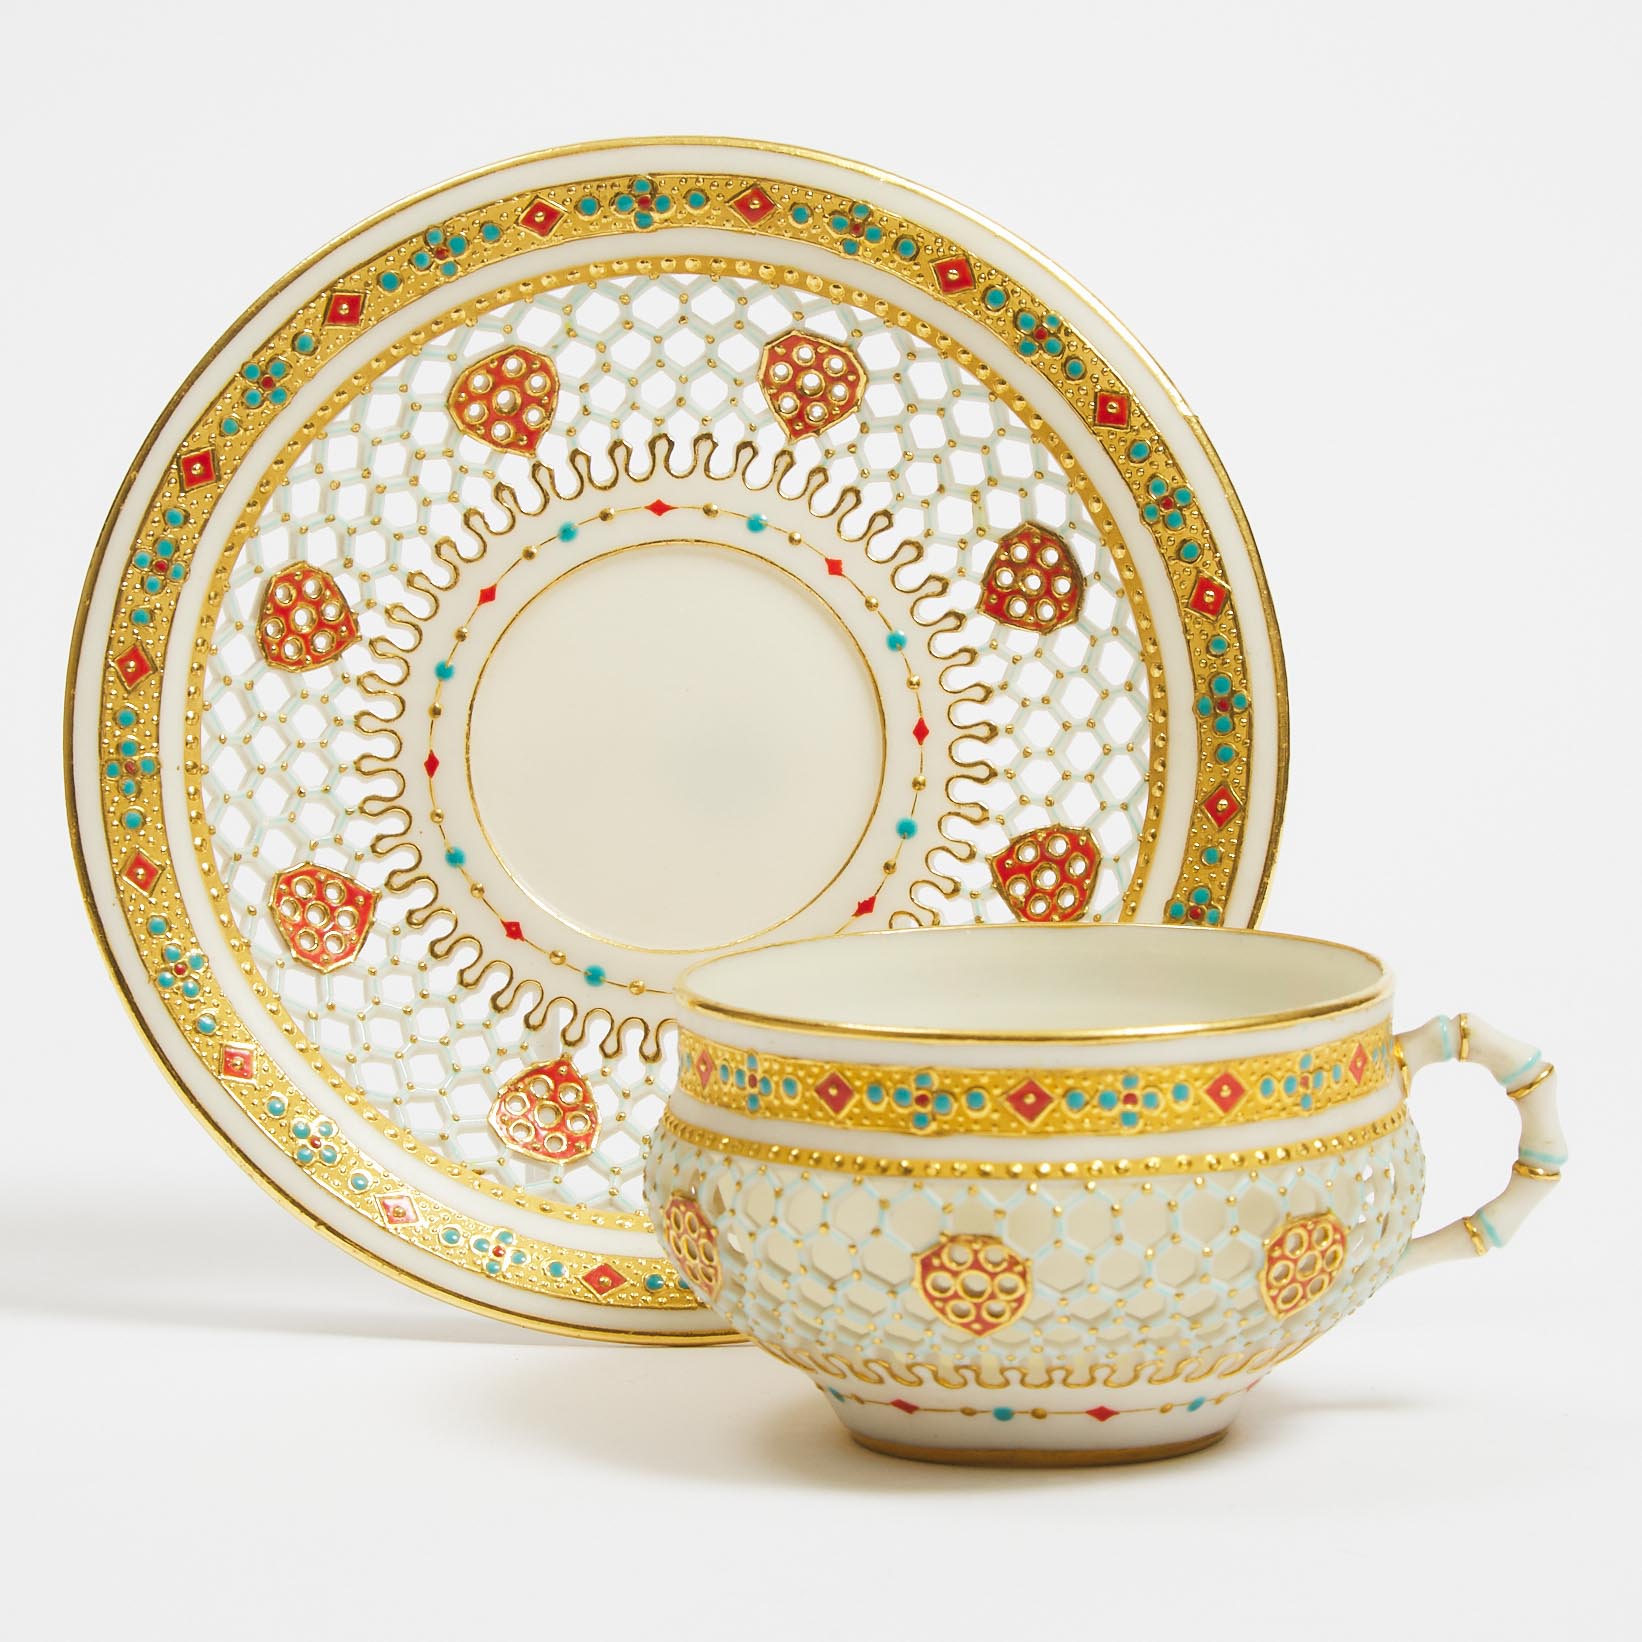 Royal Worcester 'Jeweled' and Reticulated Cup and Saucer, c.1870